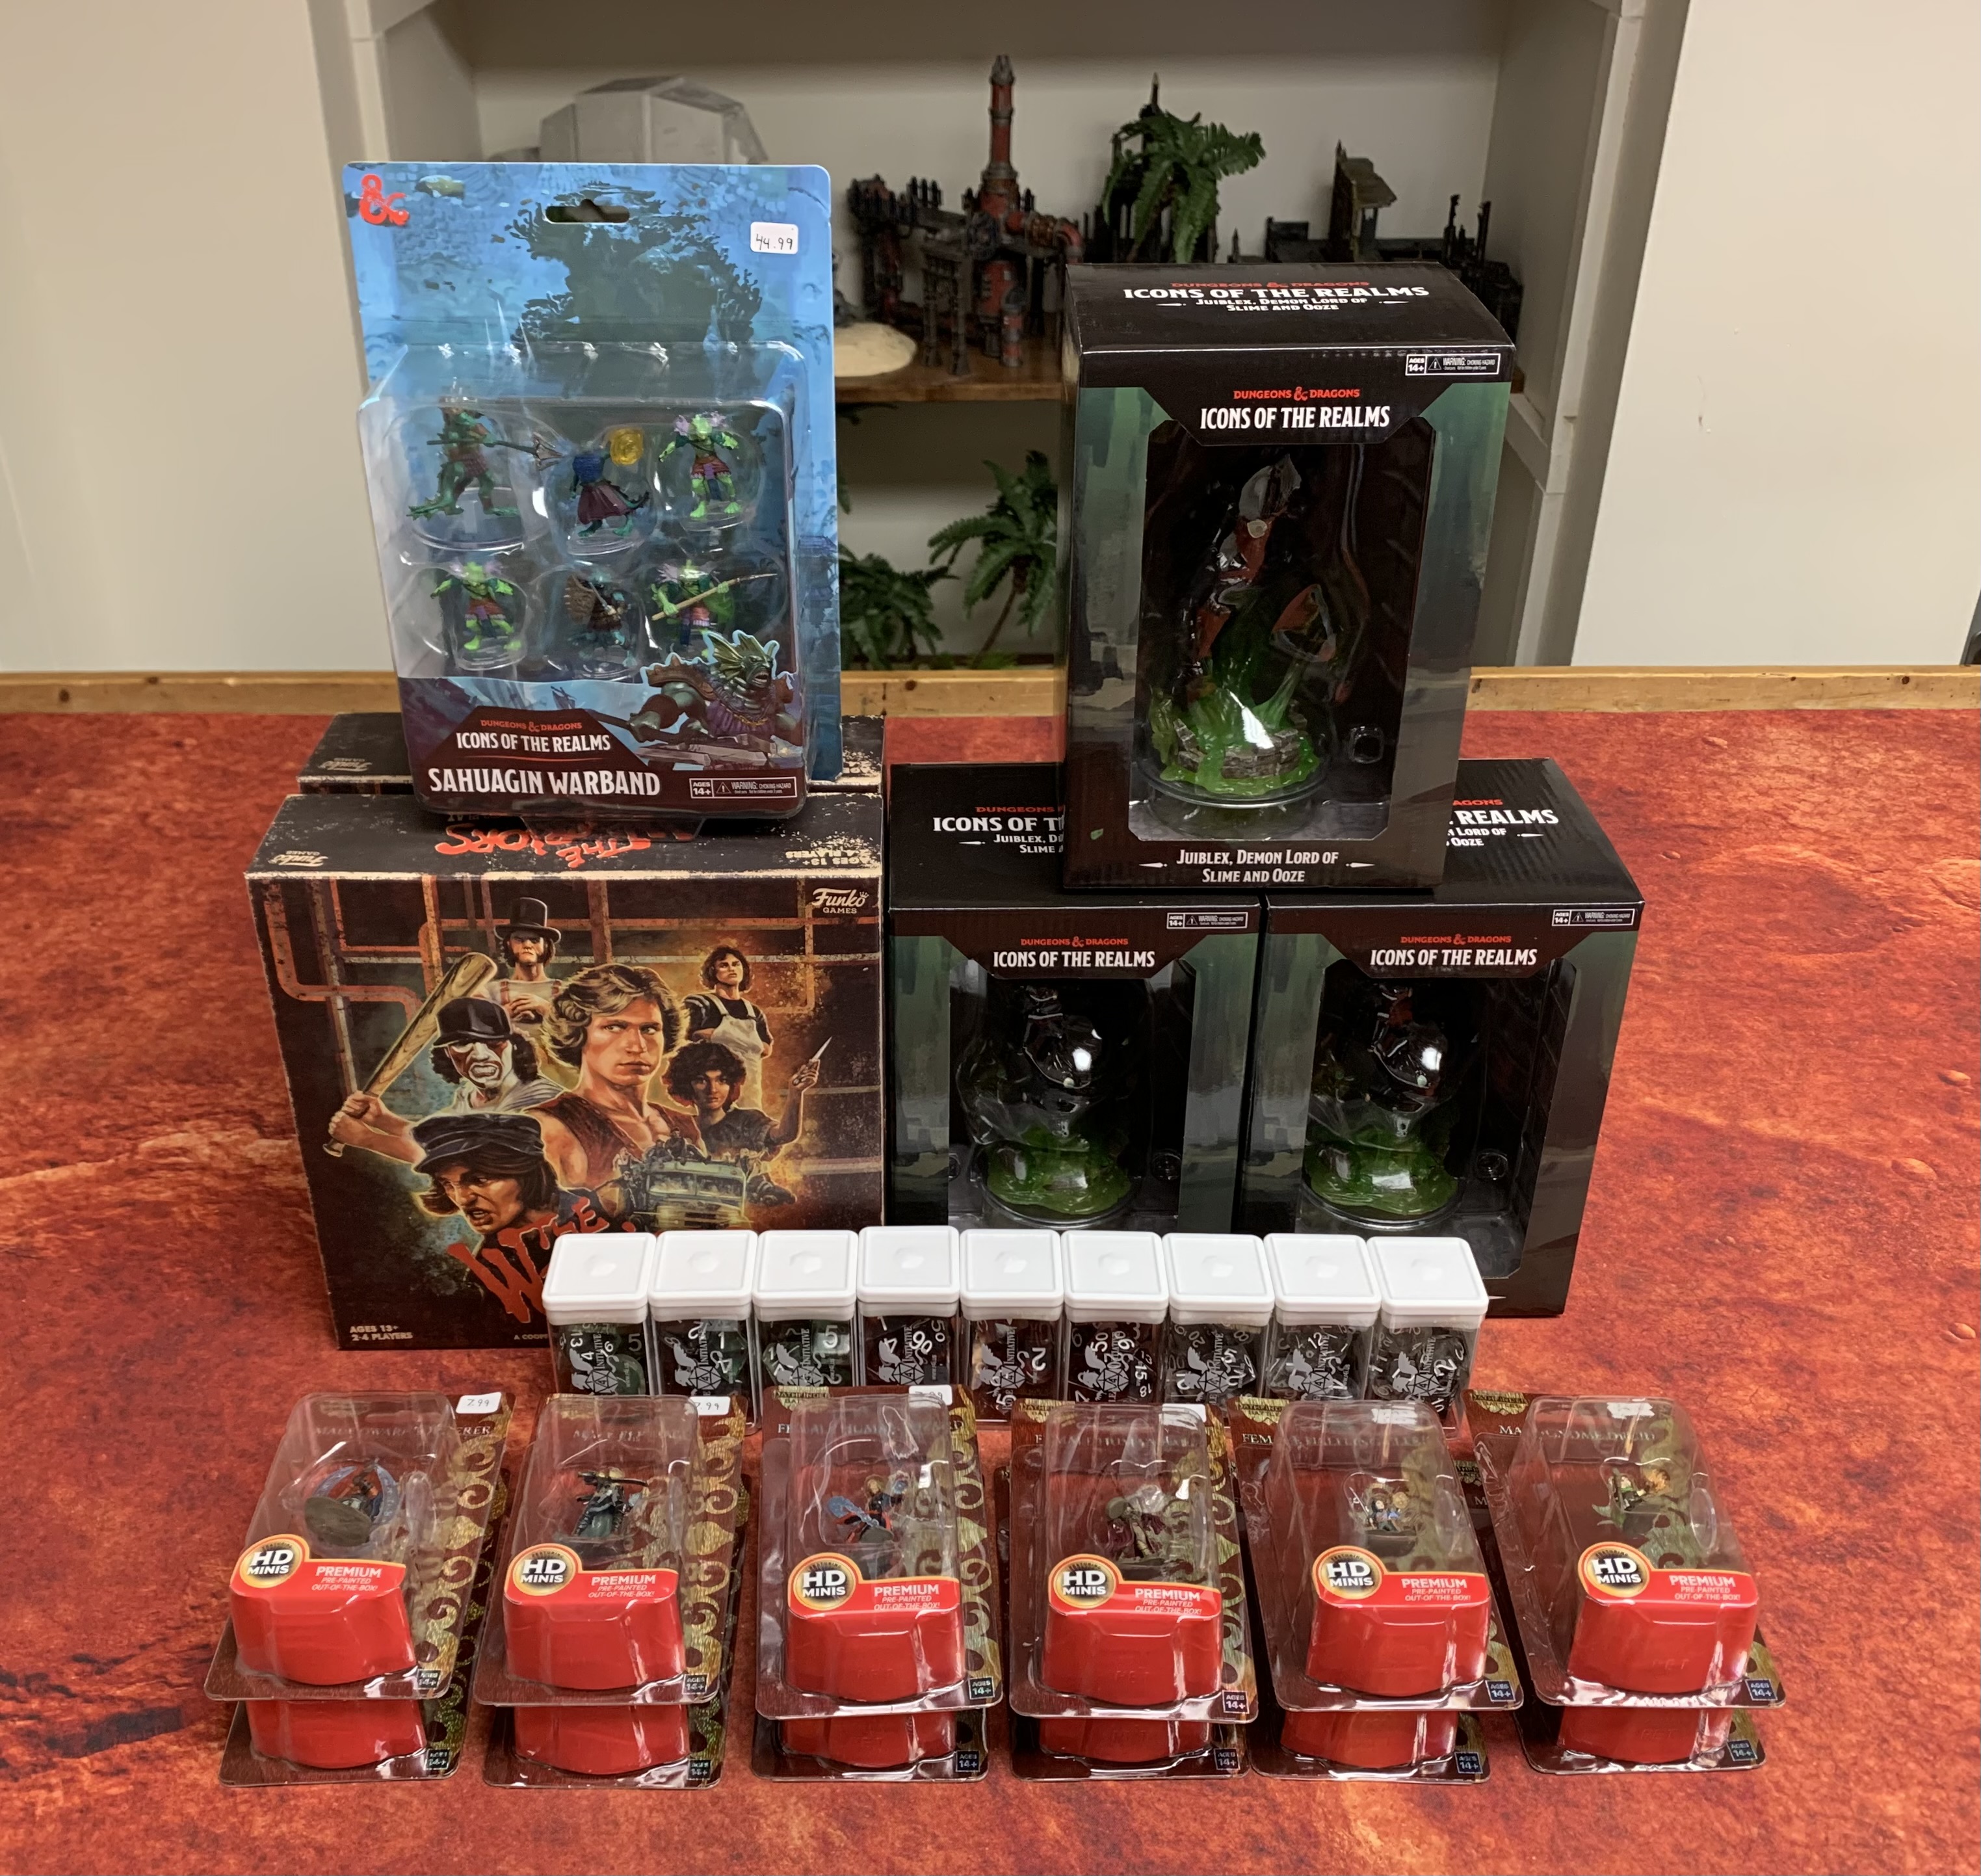 D&D Miniatures, Familiar Tales, The Warriors, and More!